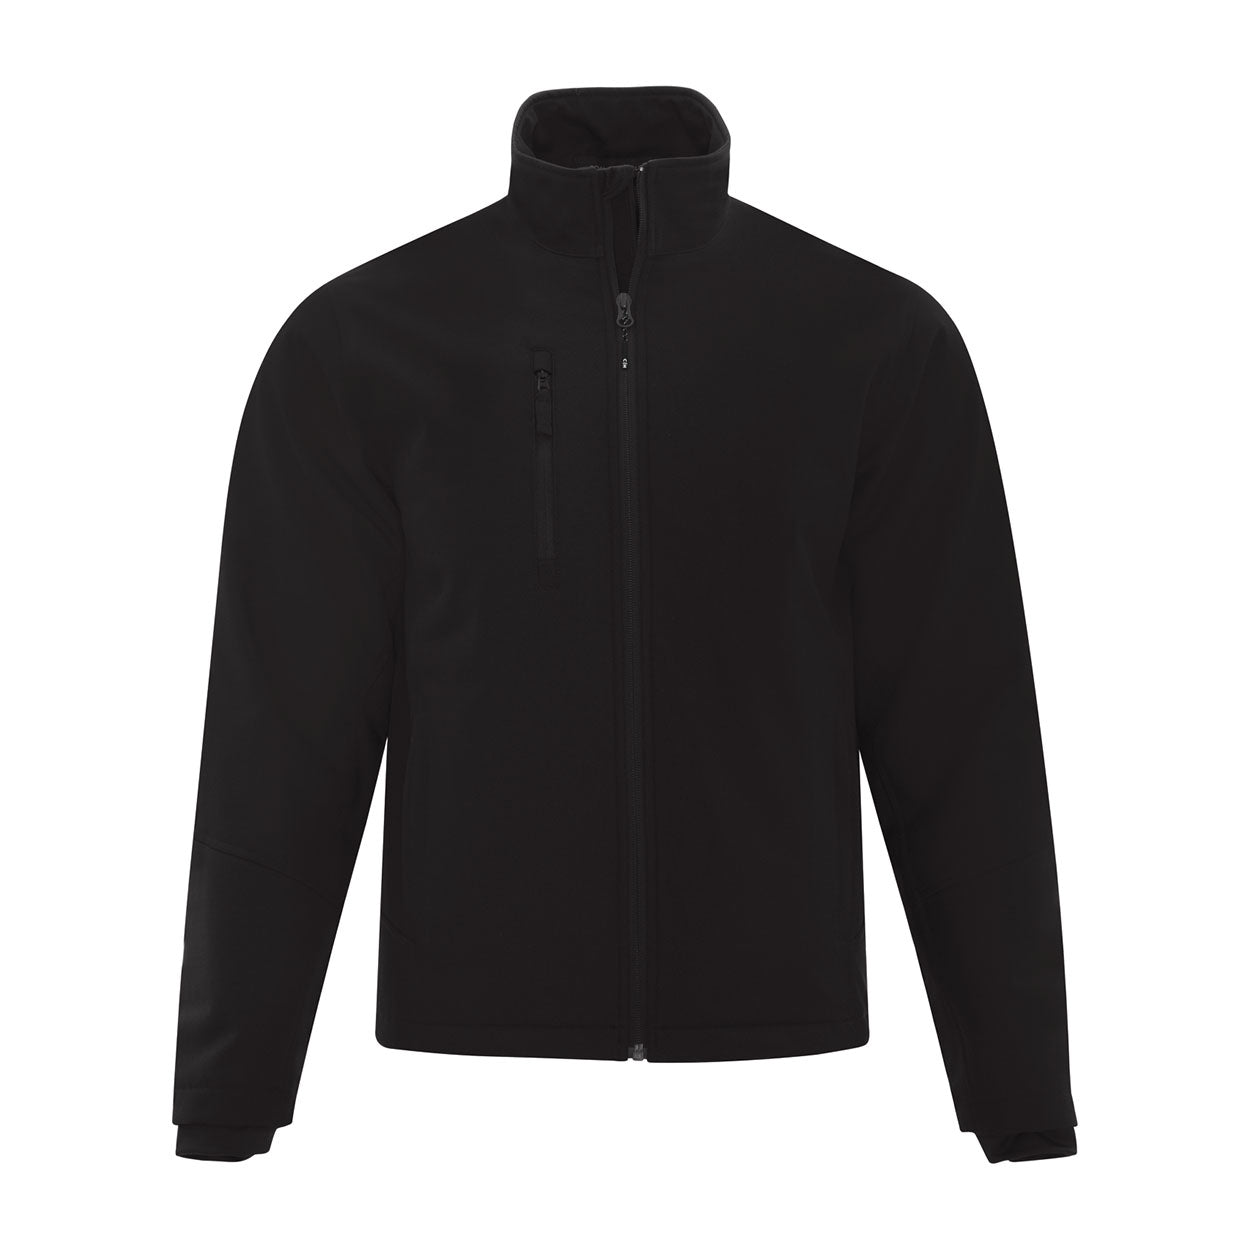 COAL HARBOUR® EVERYDAY INSULATED SOFT SHELL JACKET. J7695